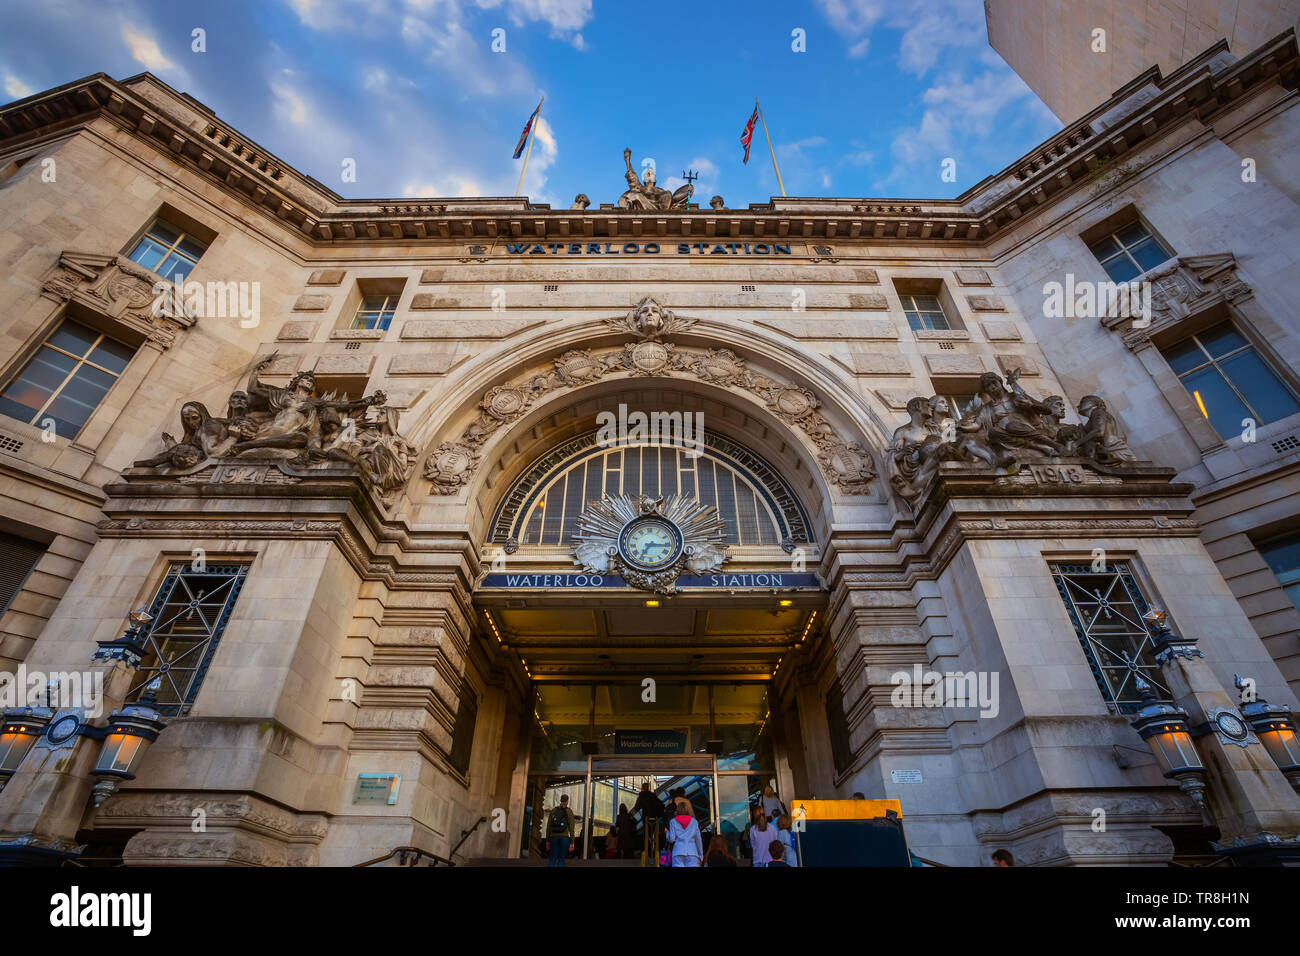 London, UK - May 13 2018: Waterloo station is the terminus of the South Western main line to Weymouth via Southampton, the West of England main line t Stock Photo